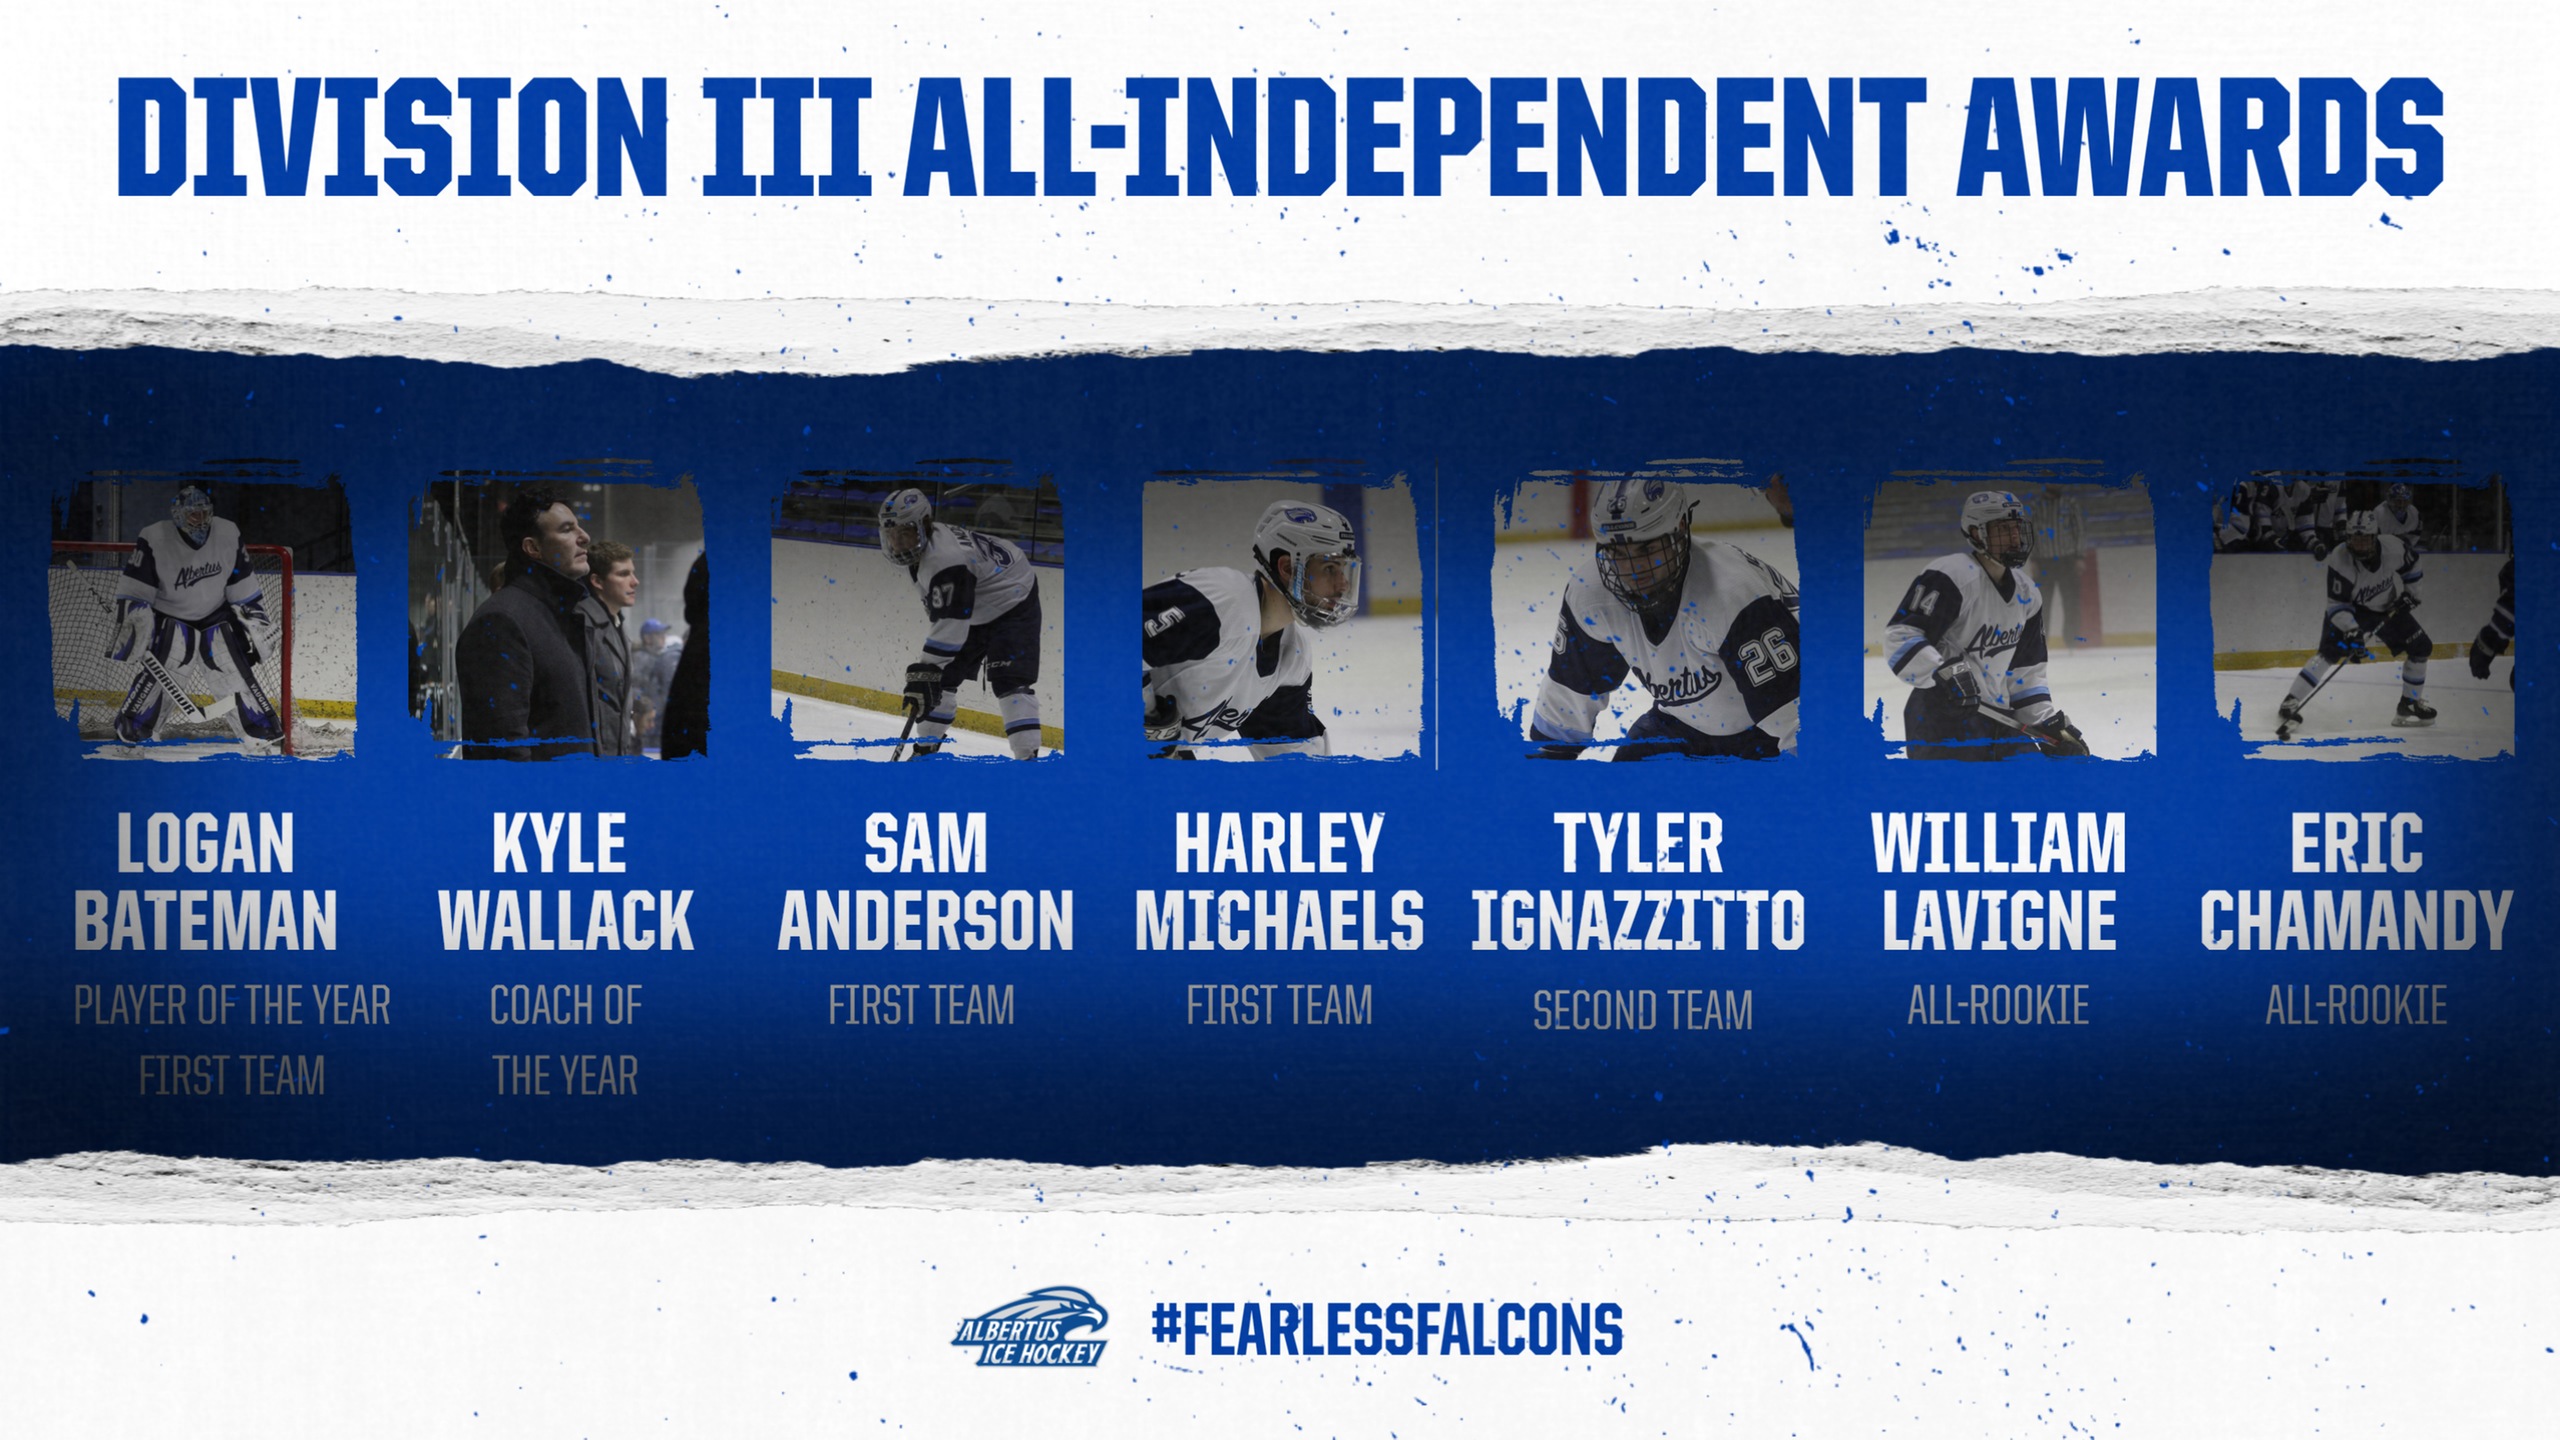 Men's Hockey Gets Six On All-Independent Team; Bateman Named Player Of The Year, Wallack Named Coach Of The Year